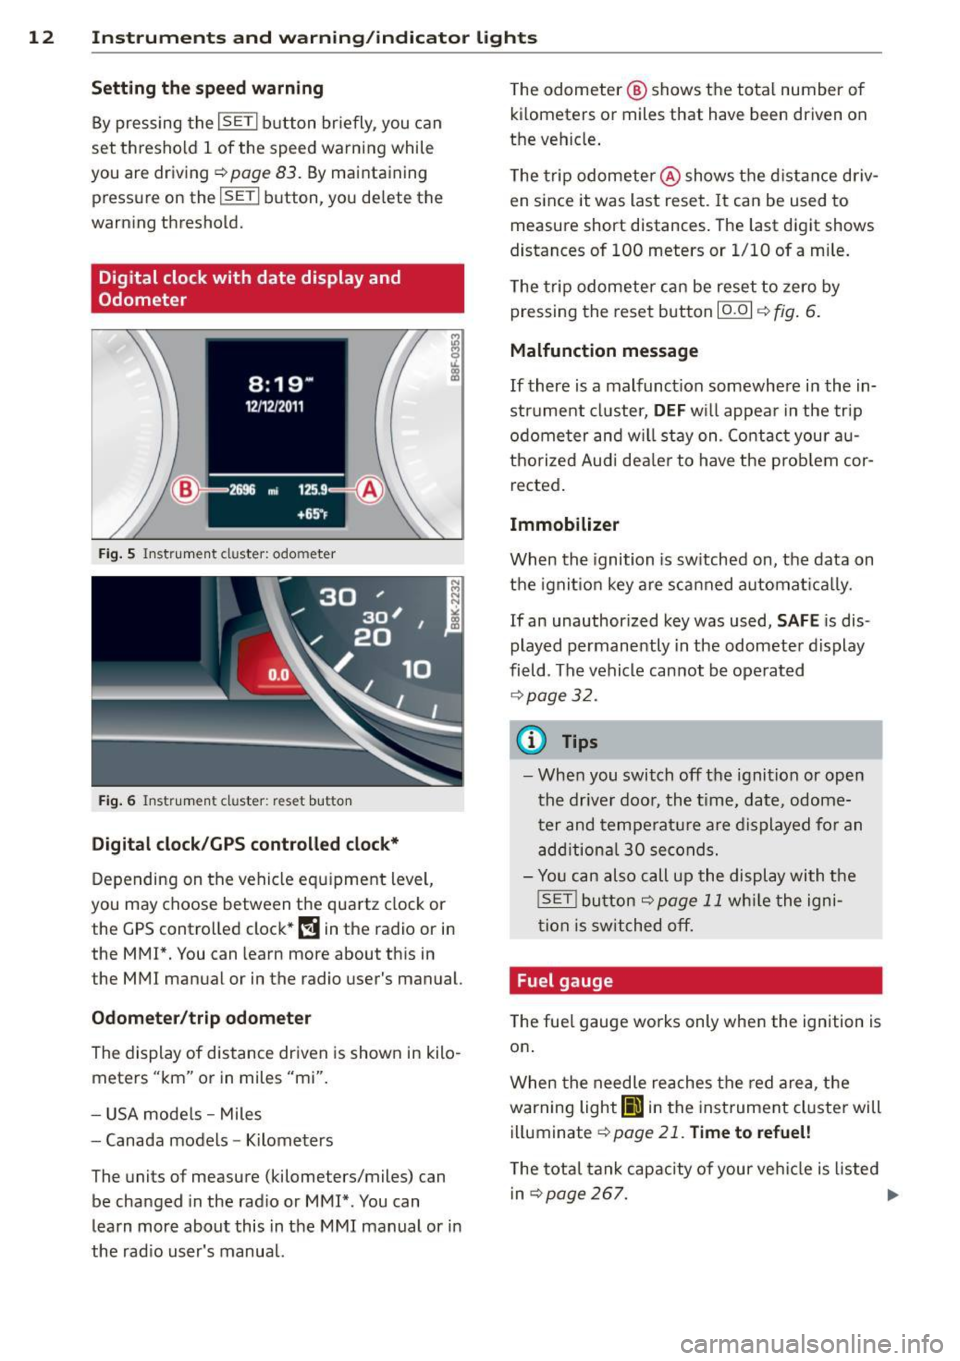 AUDI A5 CABRIOLET 2013 User Guide 12  Instrum ents  a nd warning /indic ato r  li ghts 
Se tting  th e speed warning 
By pressing  the I SETI button  br iefly,  you  can 
set  threshold  1  of the  speed  warning  while 
you  are  dri